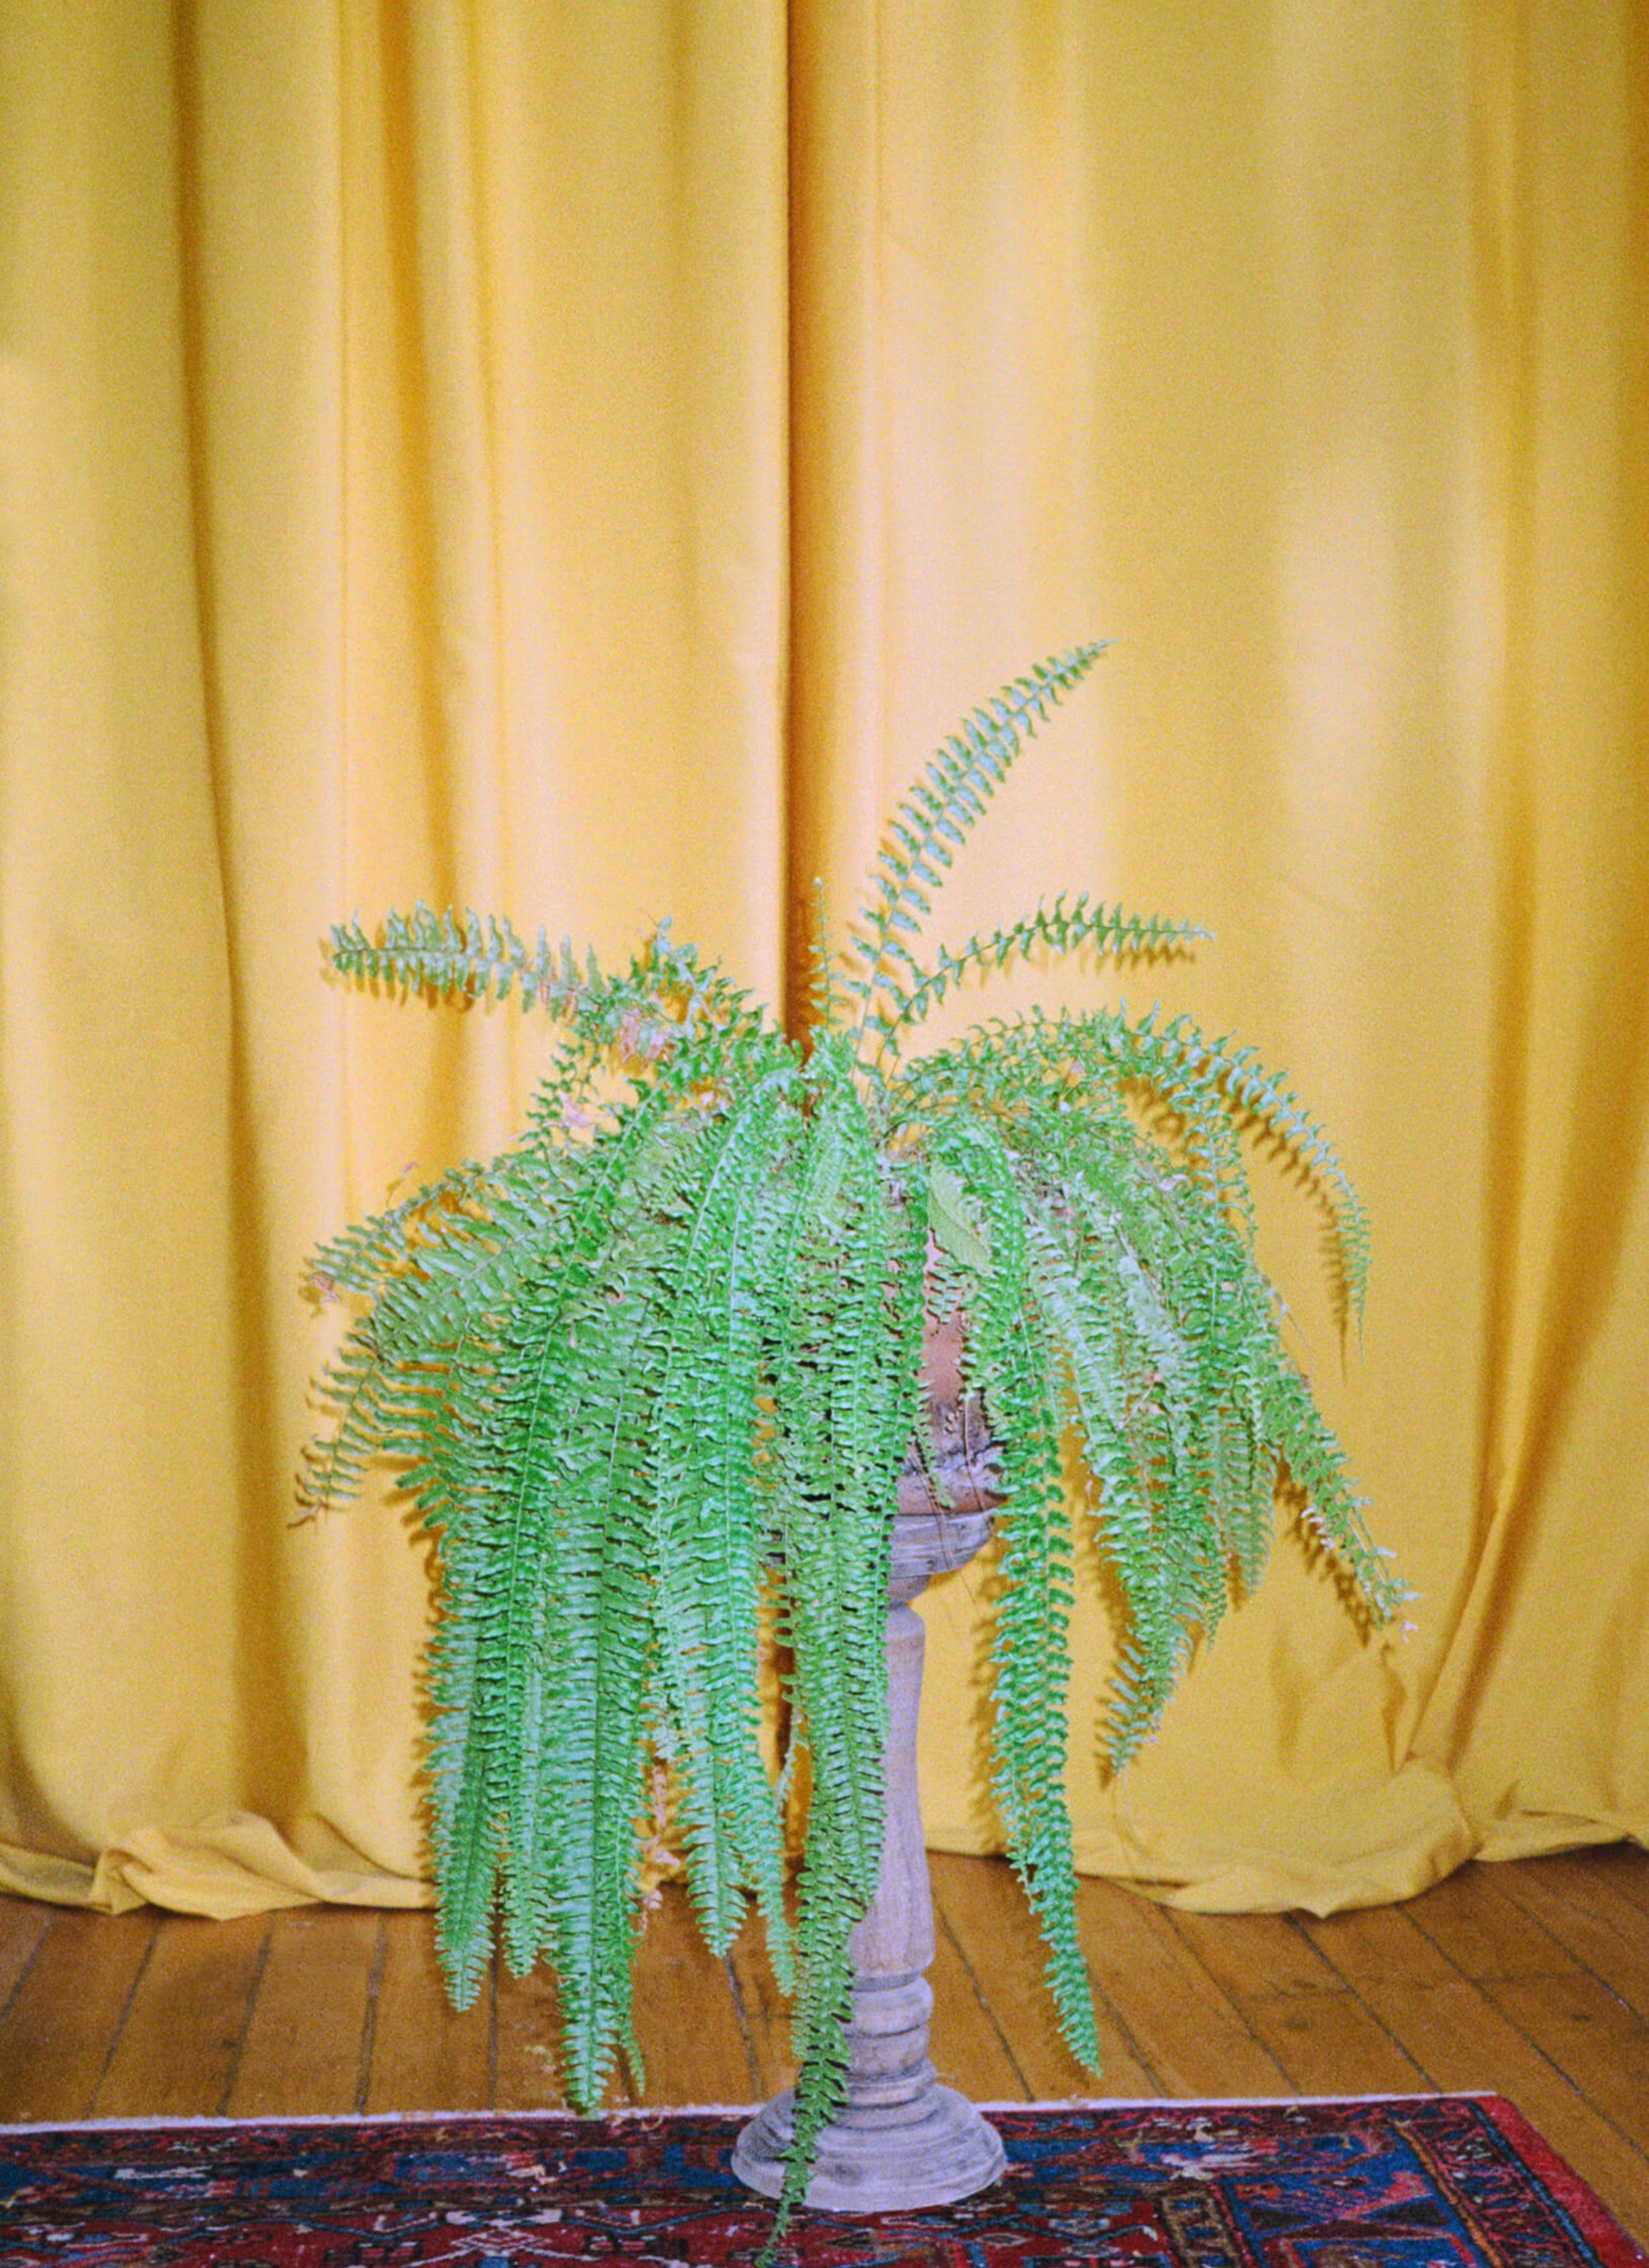 A potted plant located on a small pillar on the floor with yellow curtains in the background.